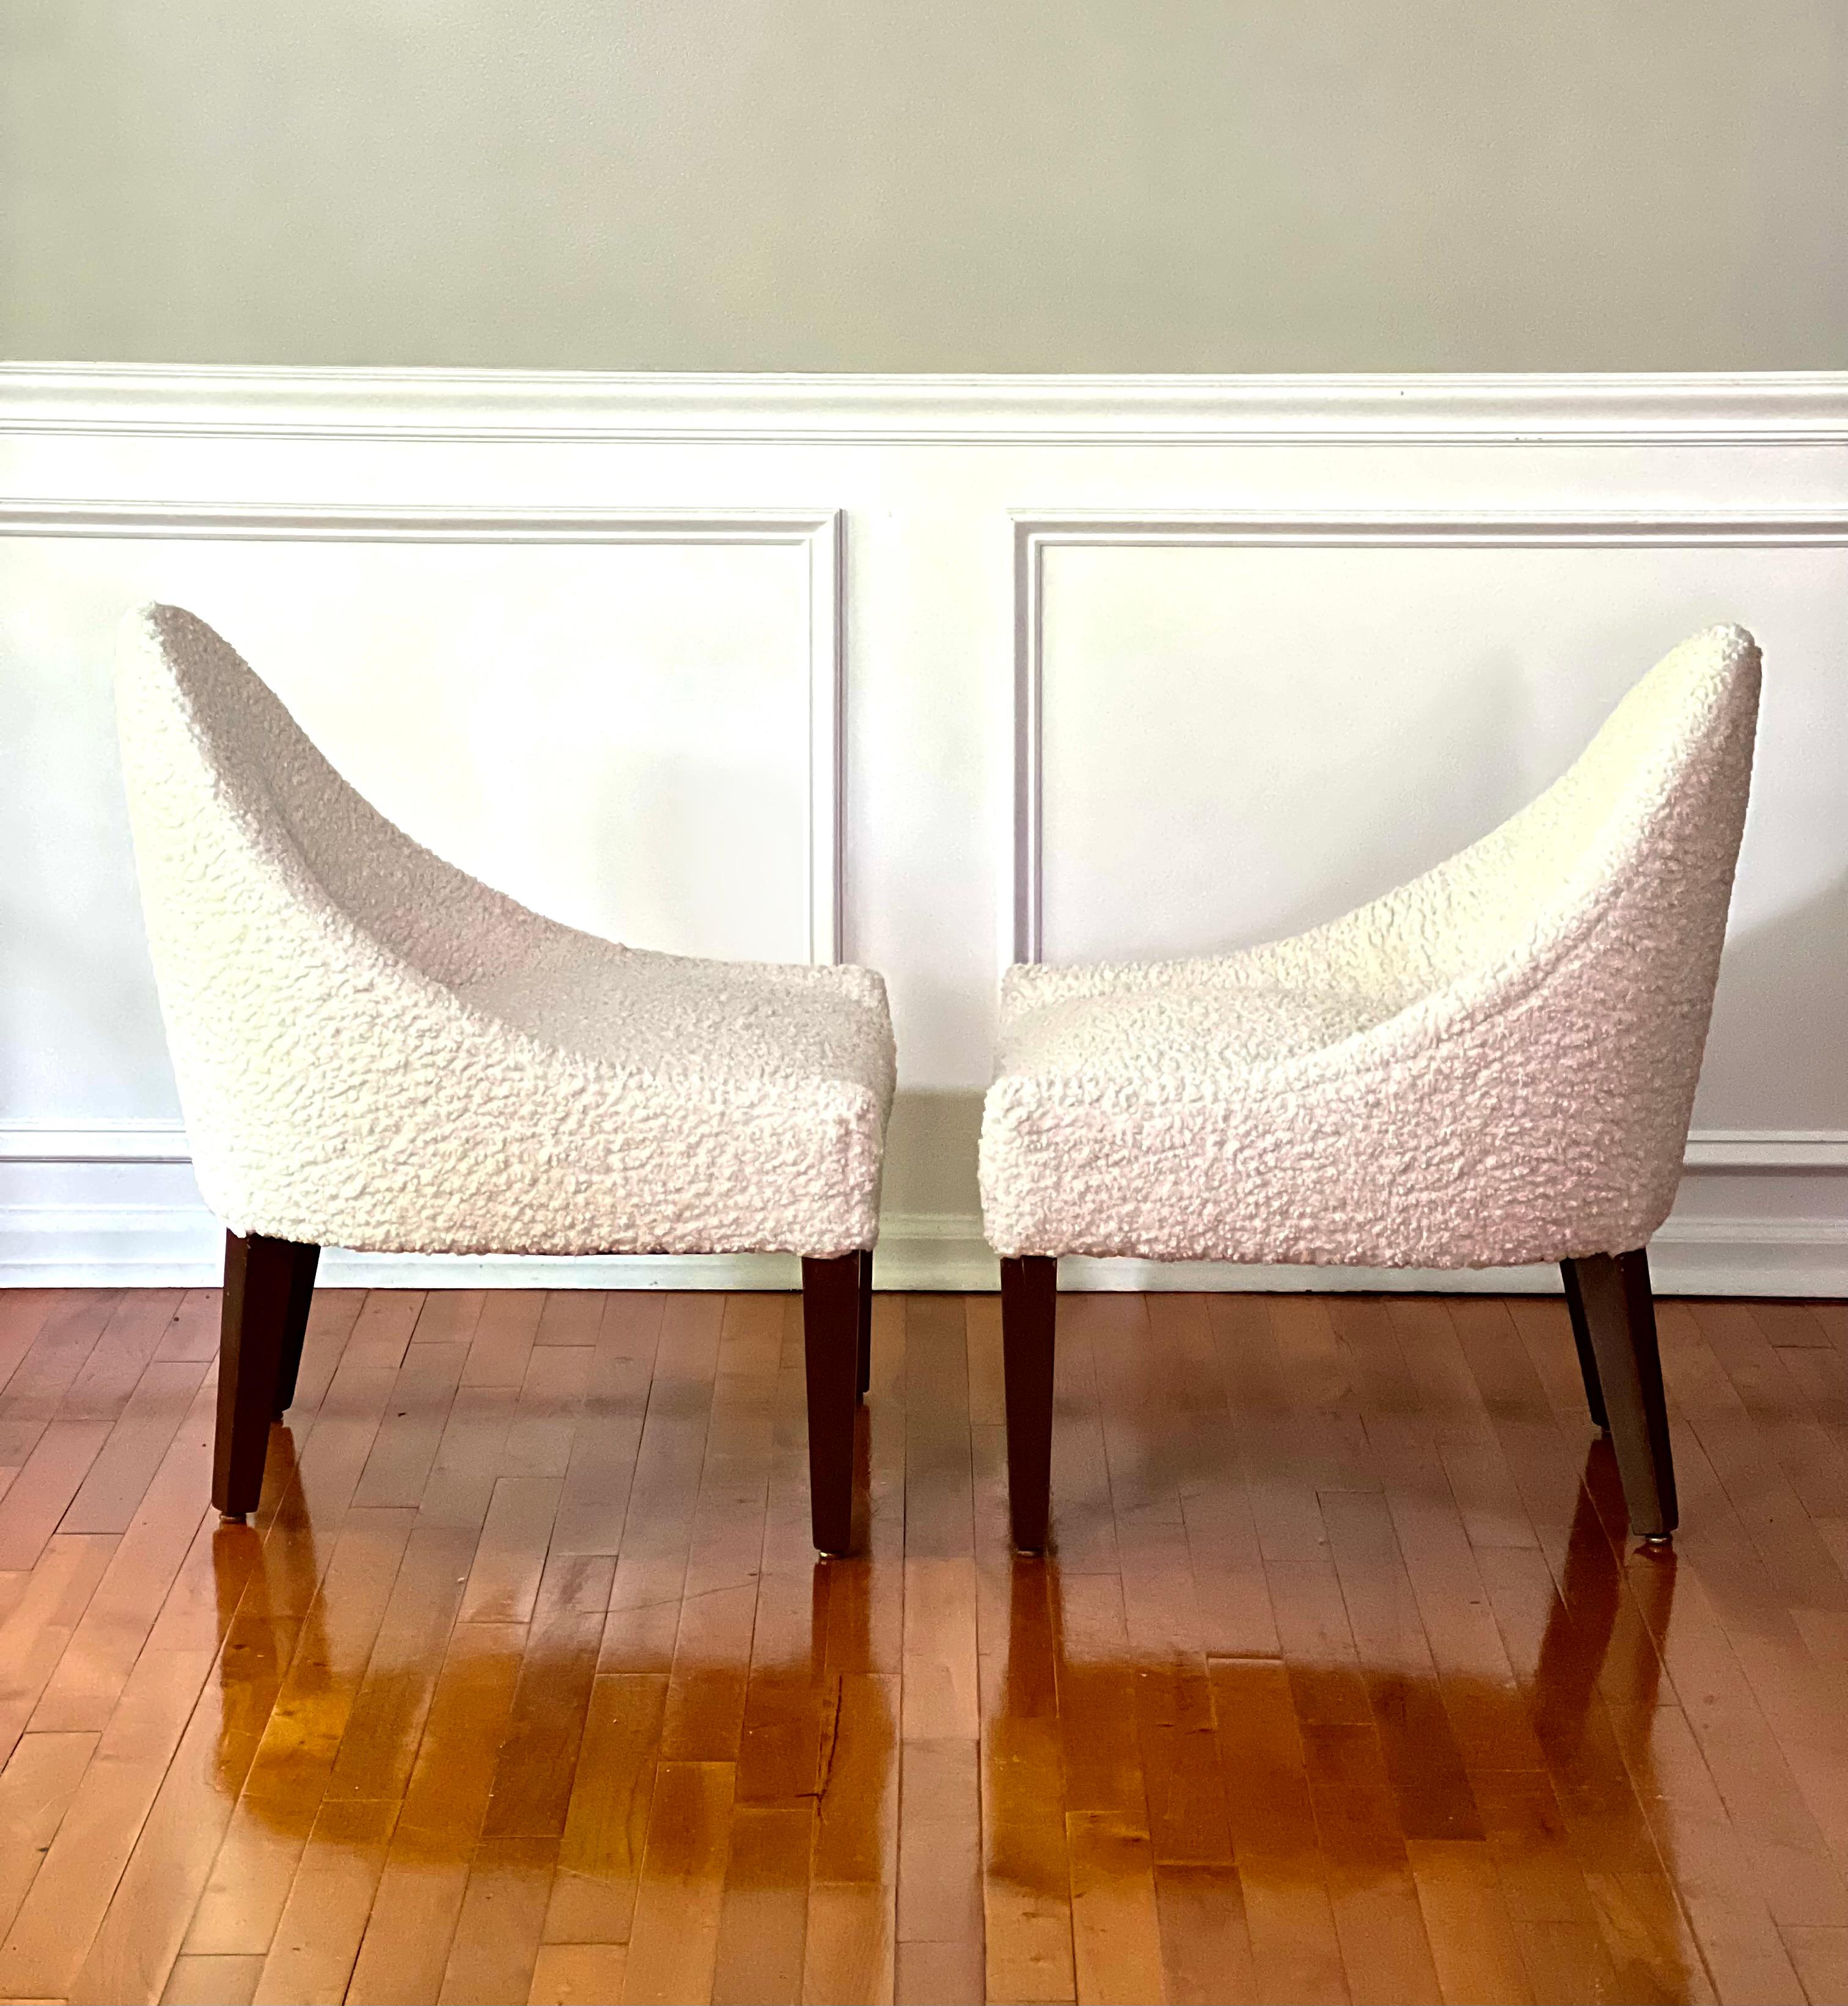 Vintage midcentury bouclé Zoey slipper chairs, a pair.

Wonderful pair of comfortable, low profile slipper chairs with beautiful design. The curved back gracefully flows into the low arm rest and seat. Newer upholstery in ivory bouclé is in